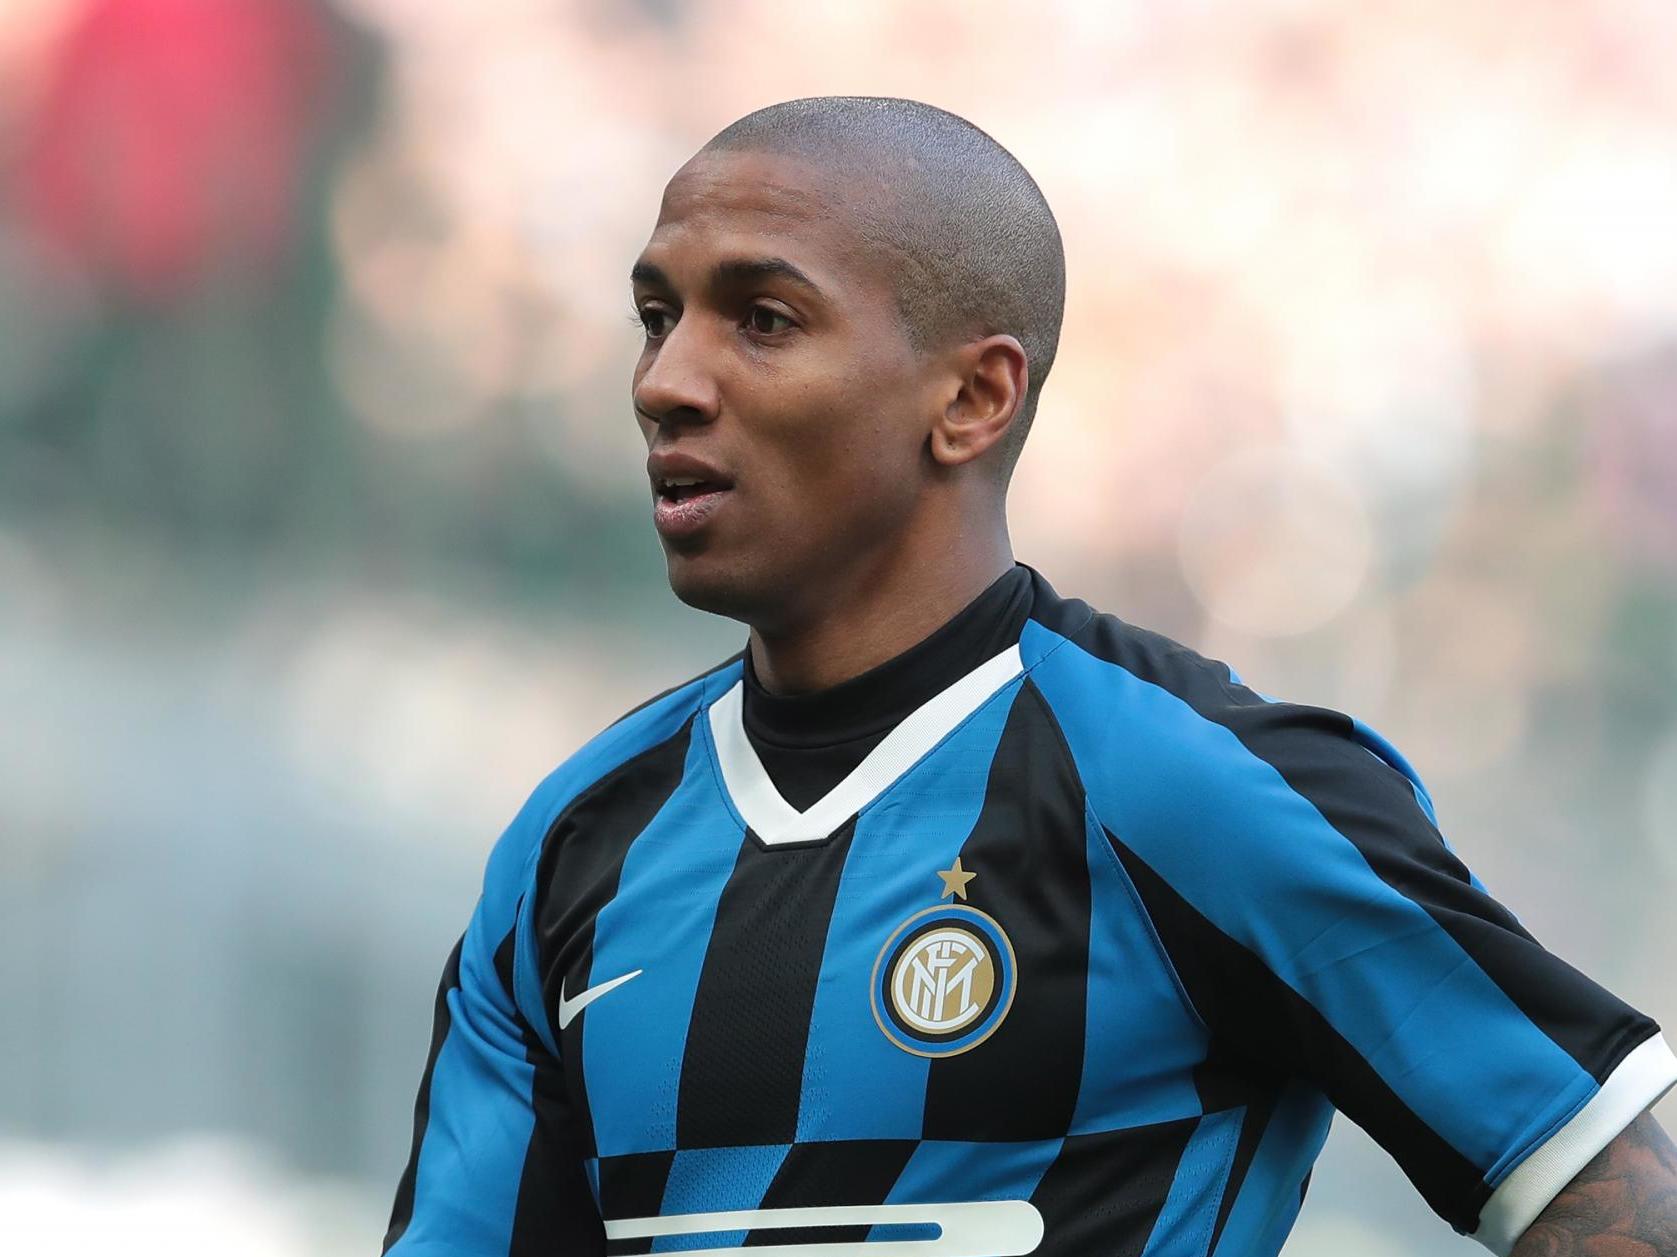 Ashley Young has given advice on how to deal with the coronavirus pandemic